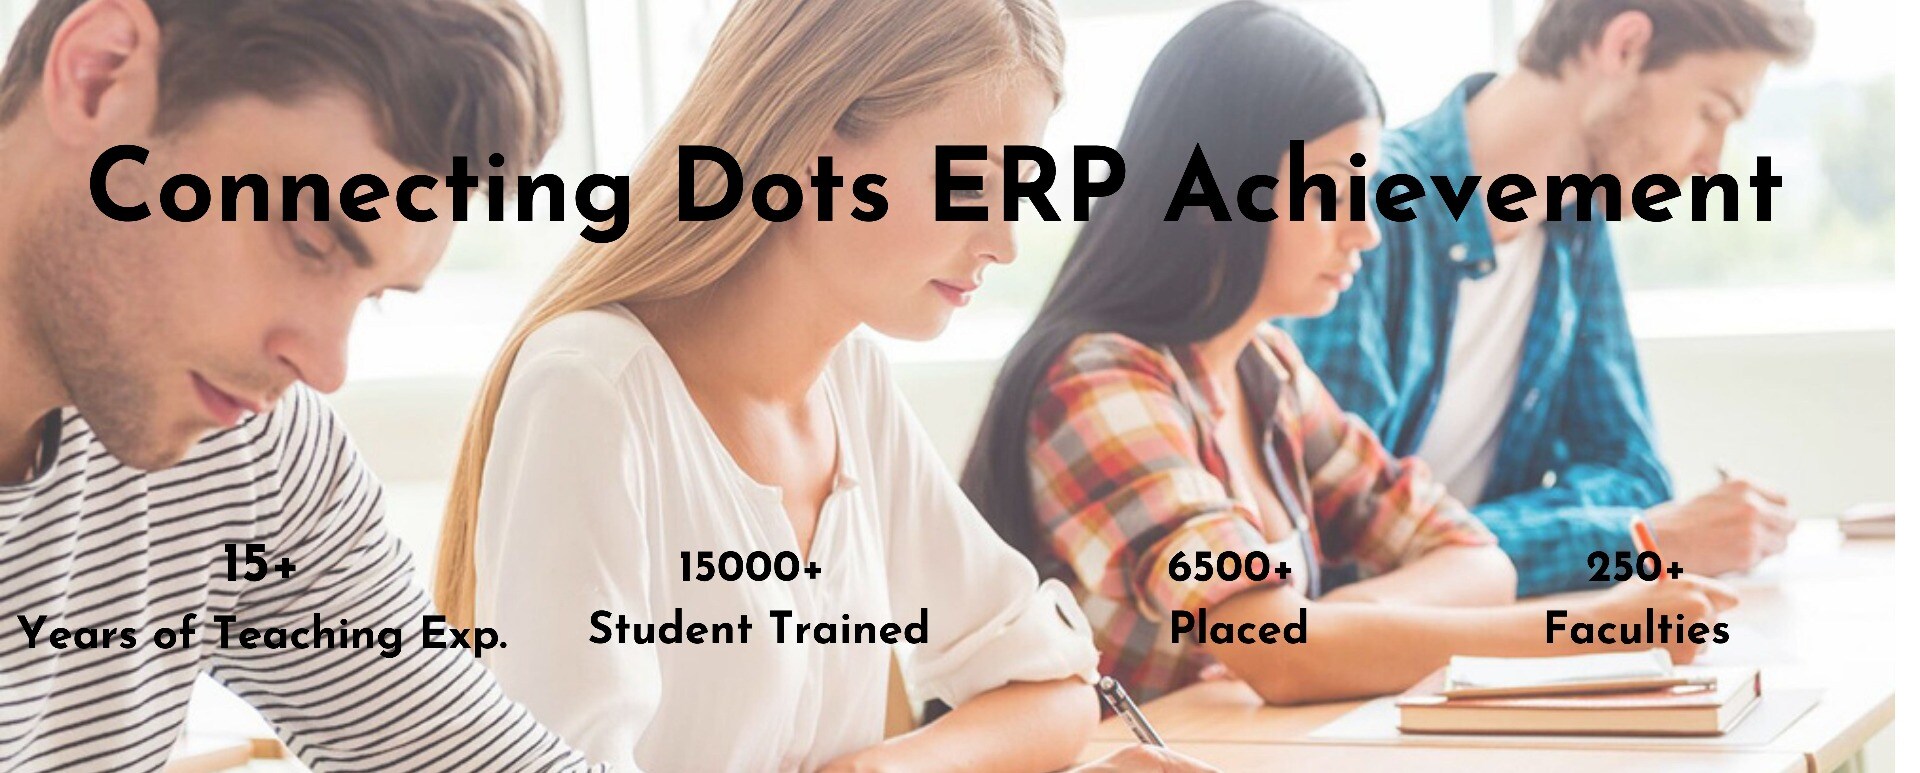 Connecting Dots Erp - SAP Training Institute in Jagtap Dairy, Pune